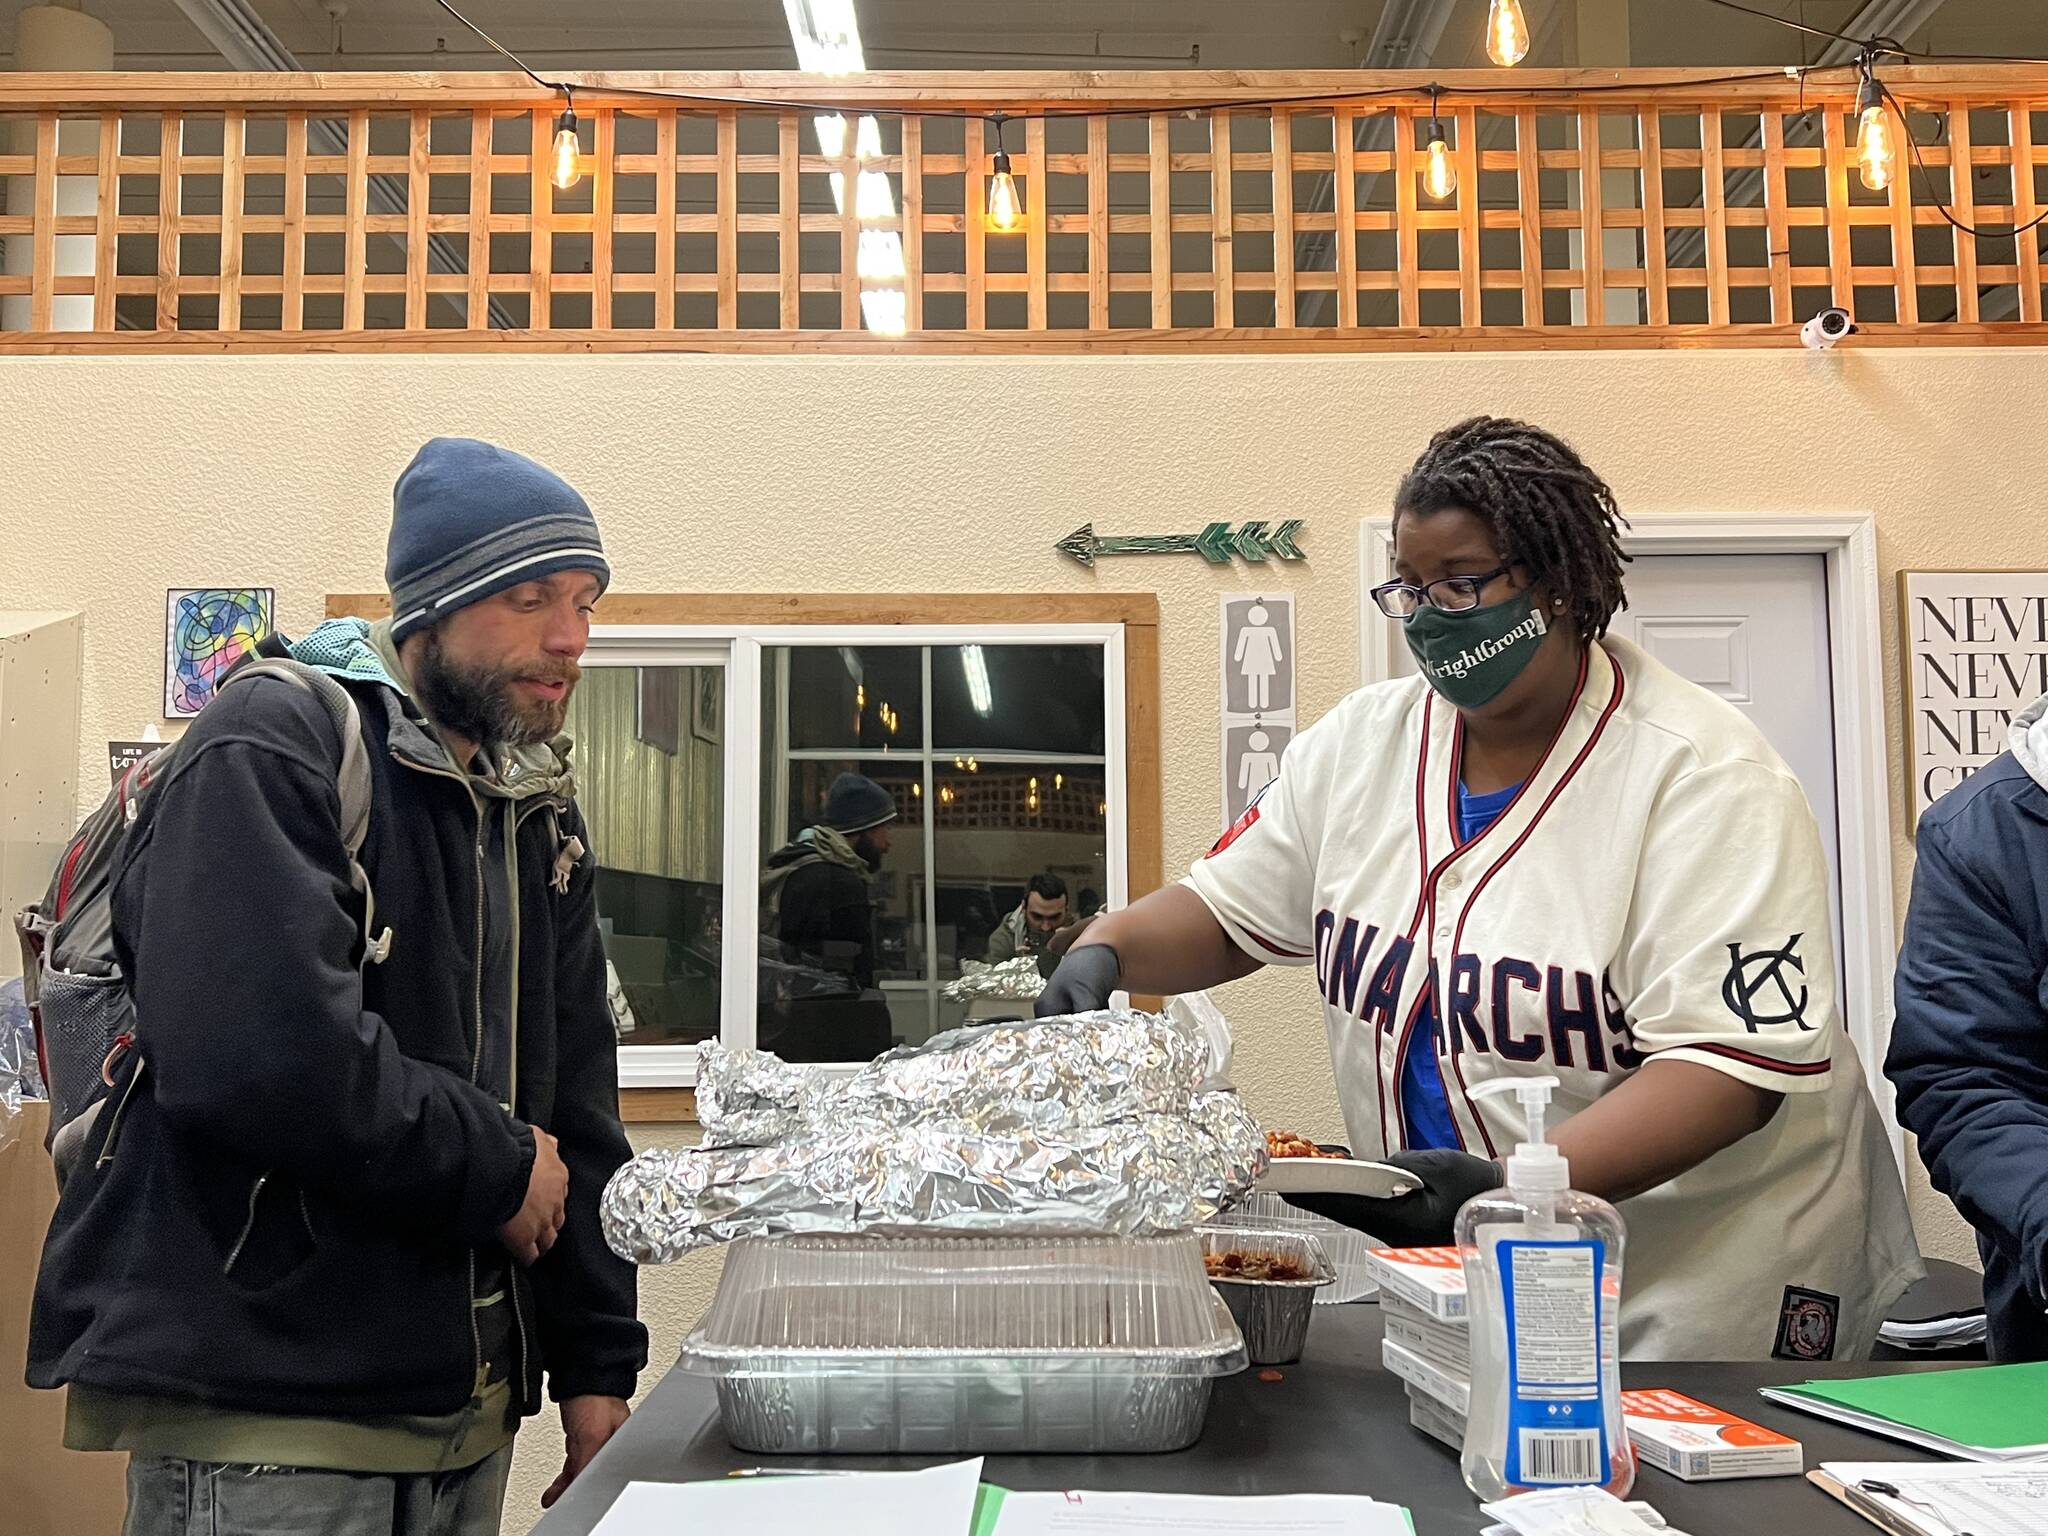 Clayton Franke / The Daily World
Tanikka Watford, executive director of The Moore Wright Group, provides a meal at the group’s warming shelter in the old Swanson’s building in Aberdeen on Tuesday night.